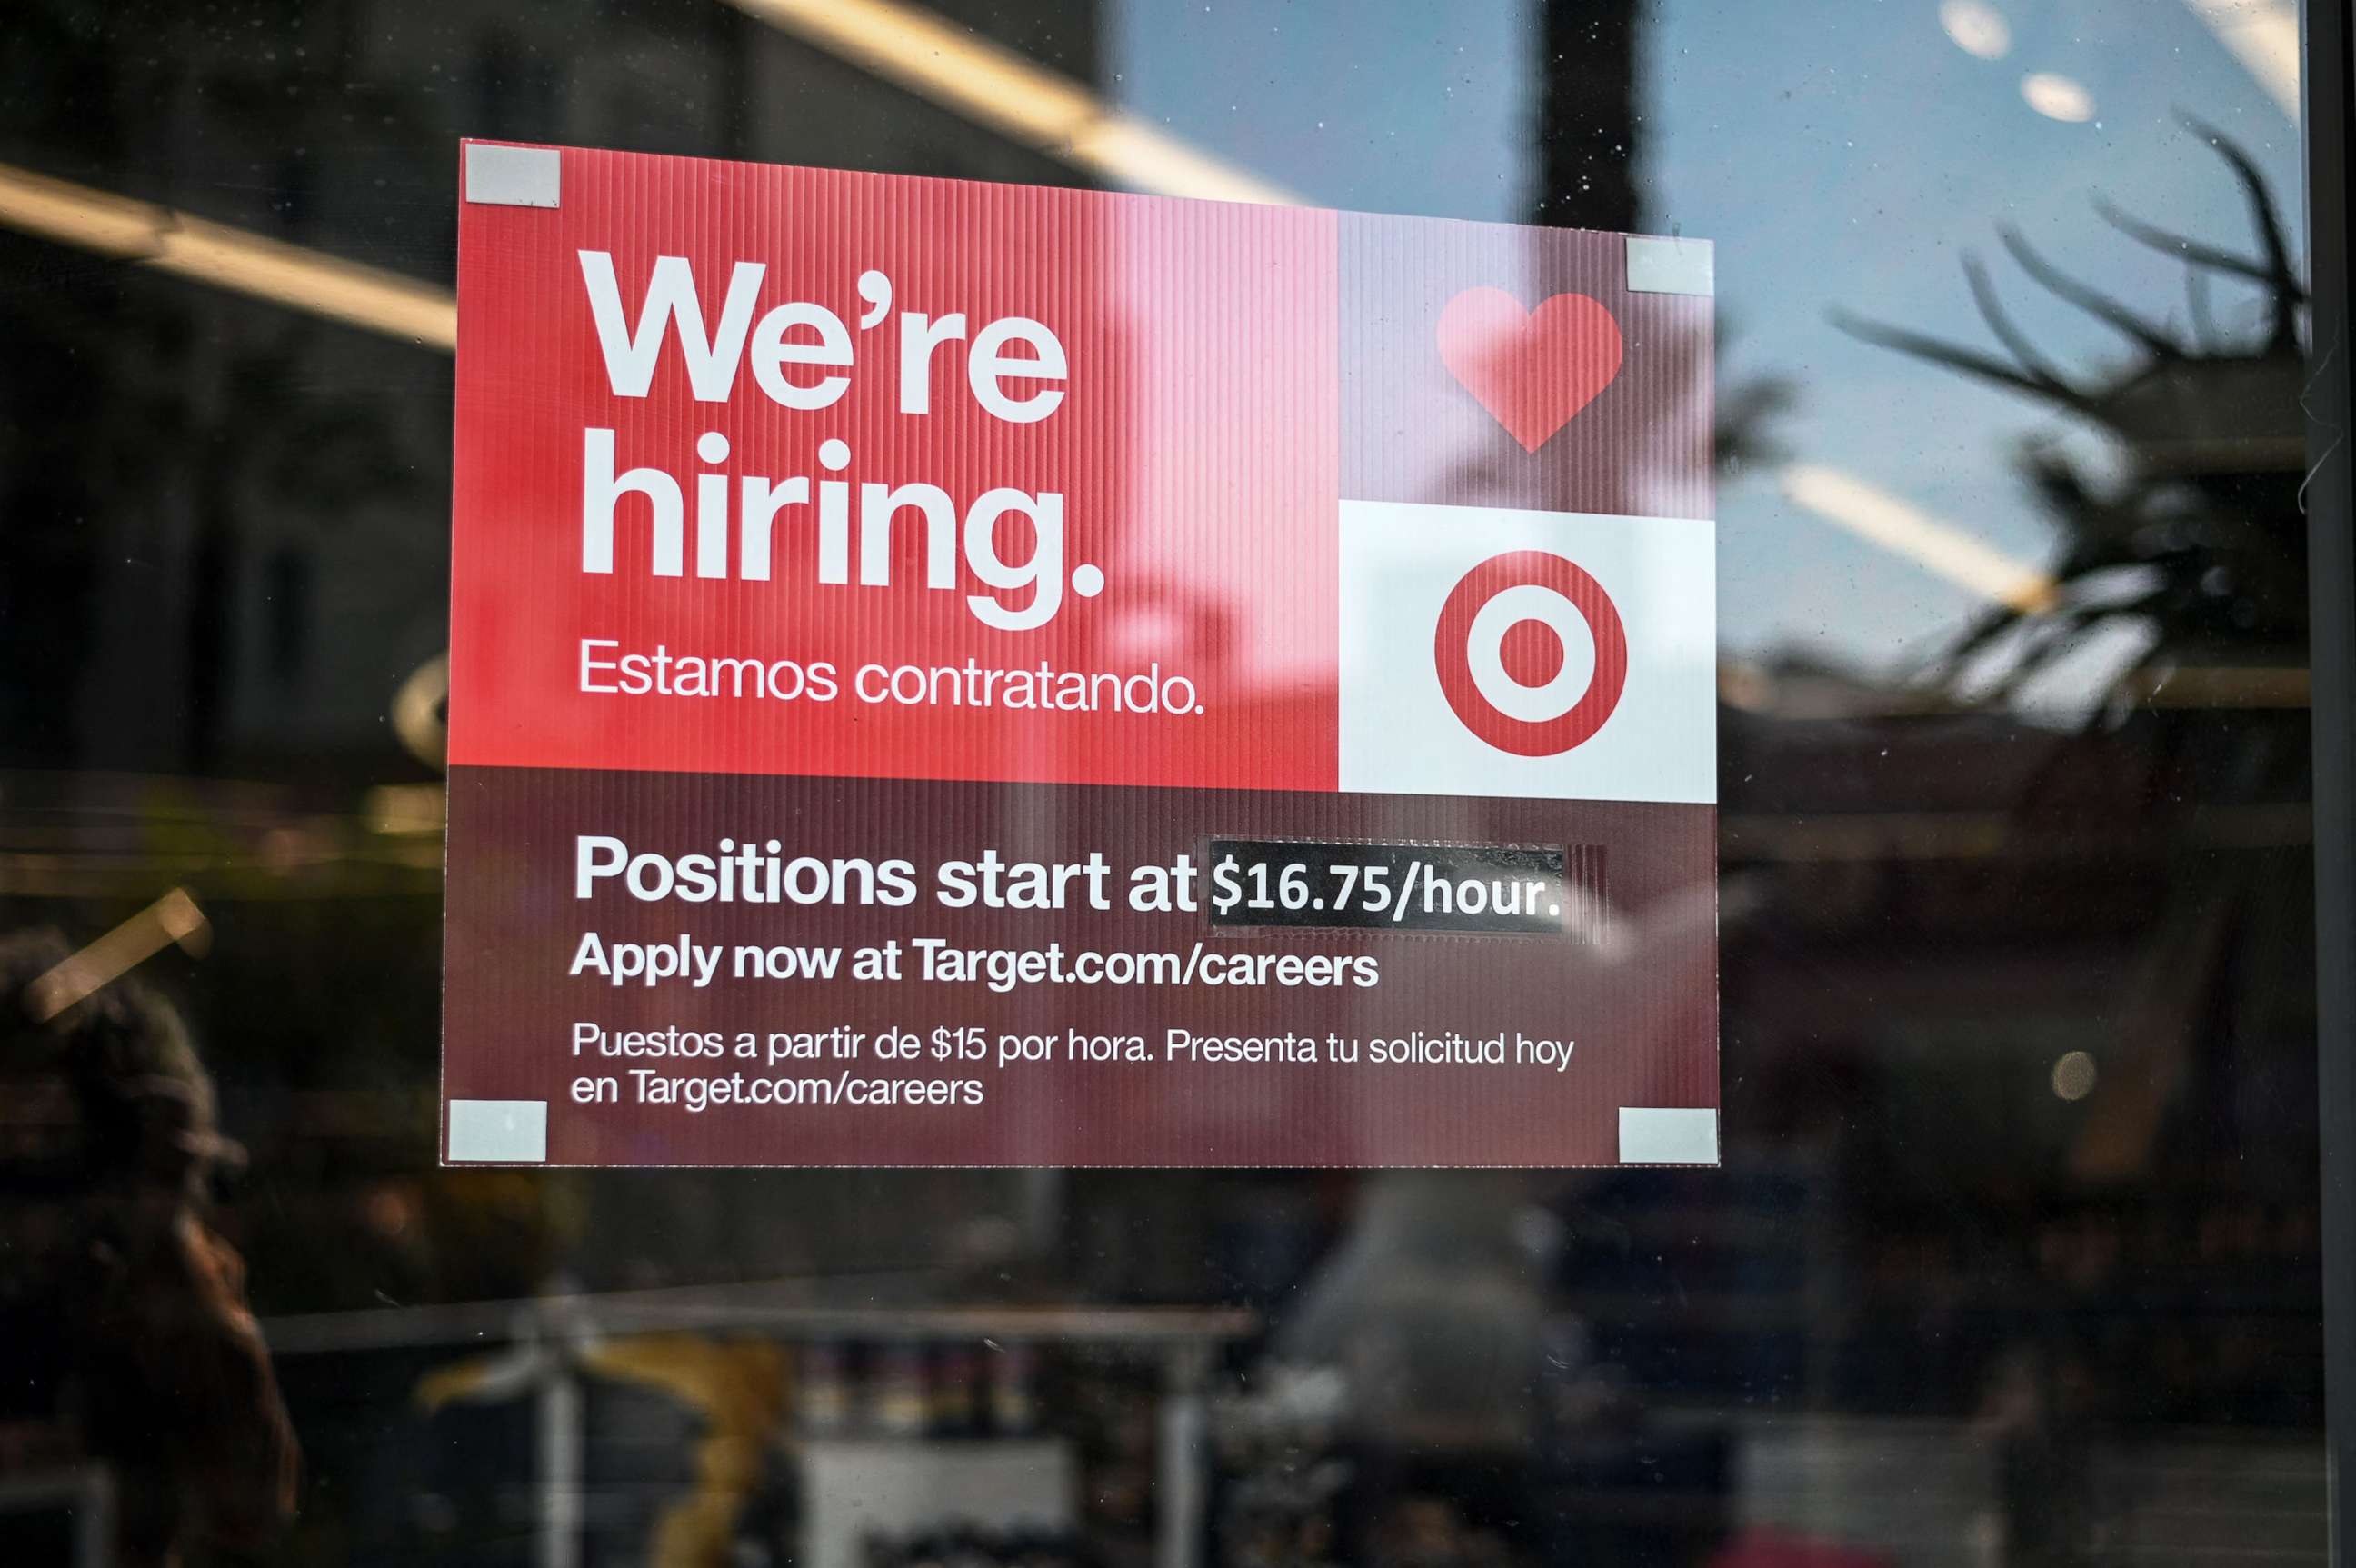 PHOTO: A sign advertising for new employees with an updated starting salary of $16.75 per hour is seen in the window of a Target store in Hollywood, Calif., Nov. 9, 2021.